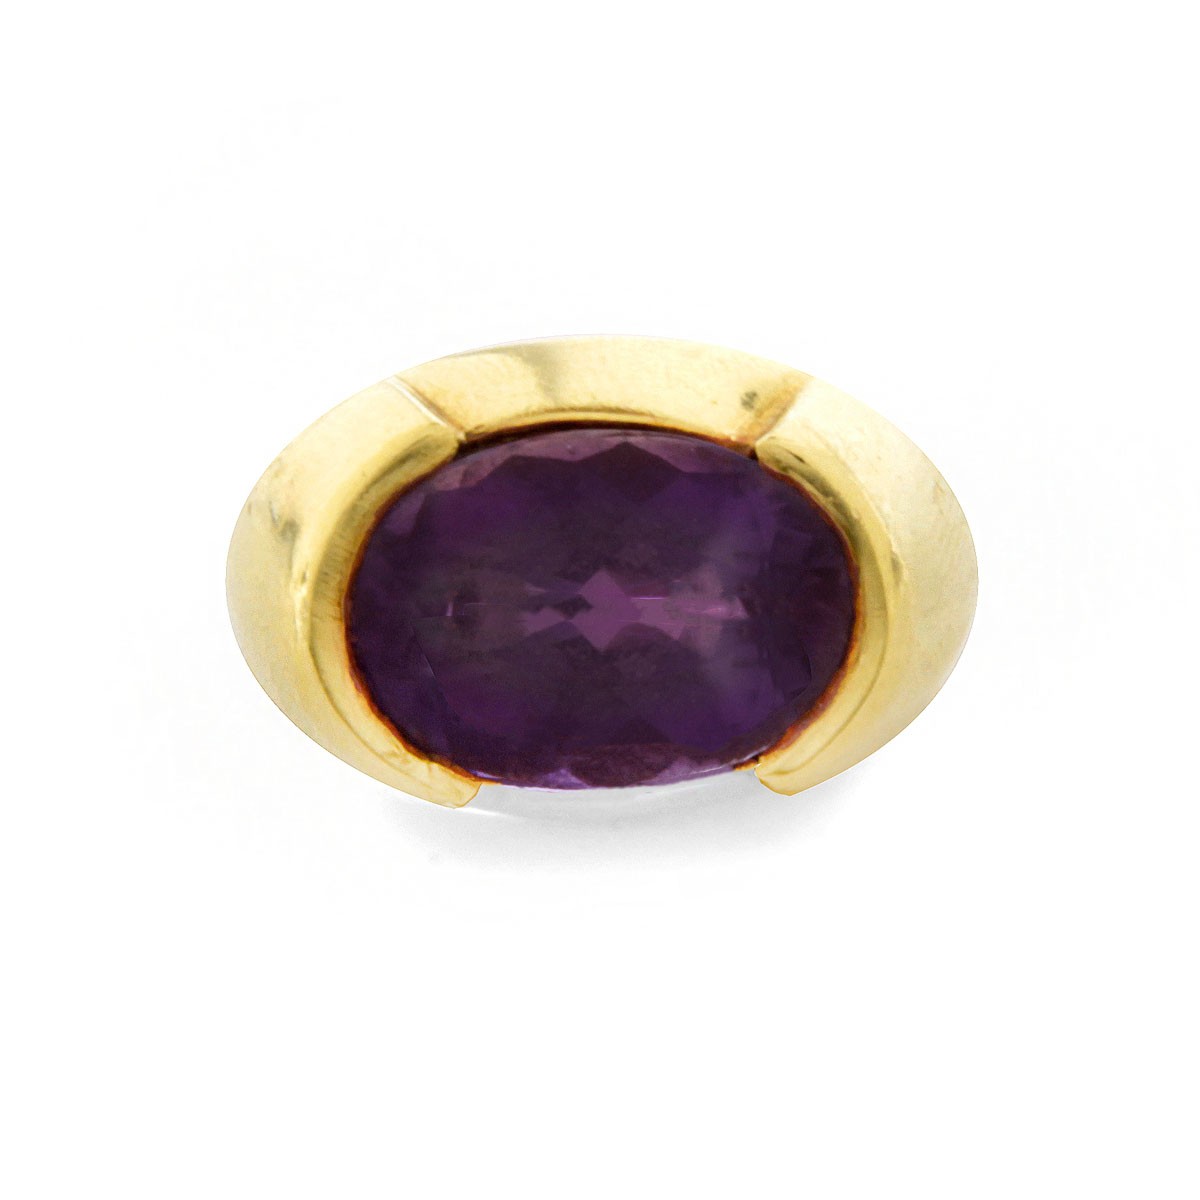 Vintage Amethyst and 18K Ring - Image 2 of 6